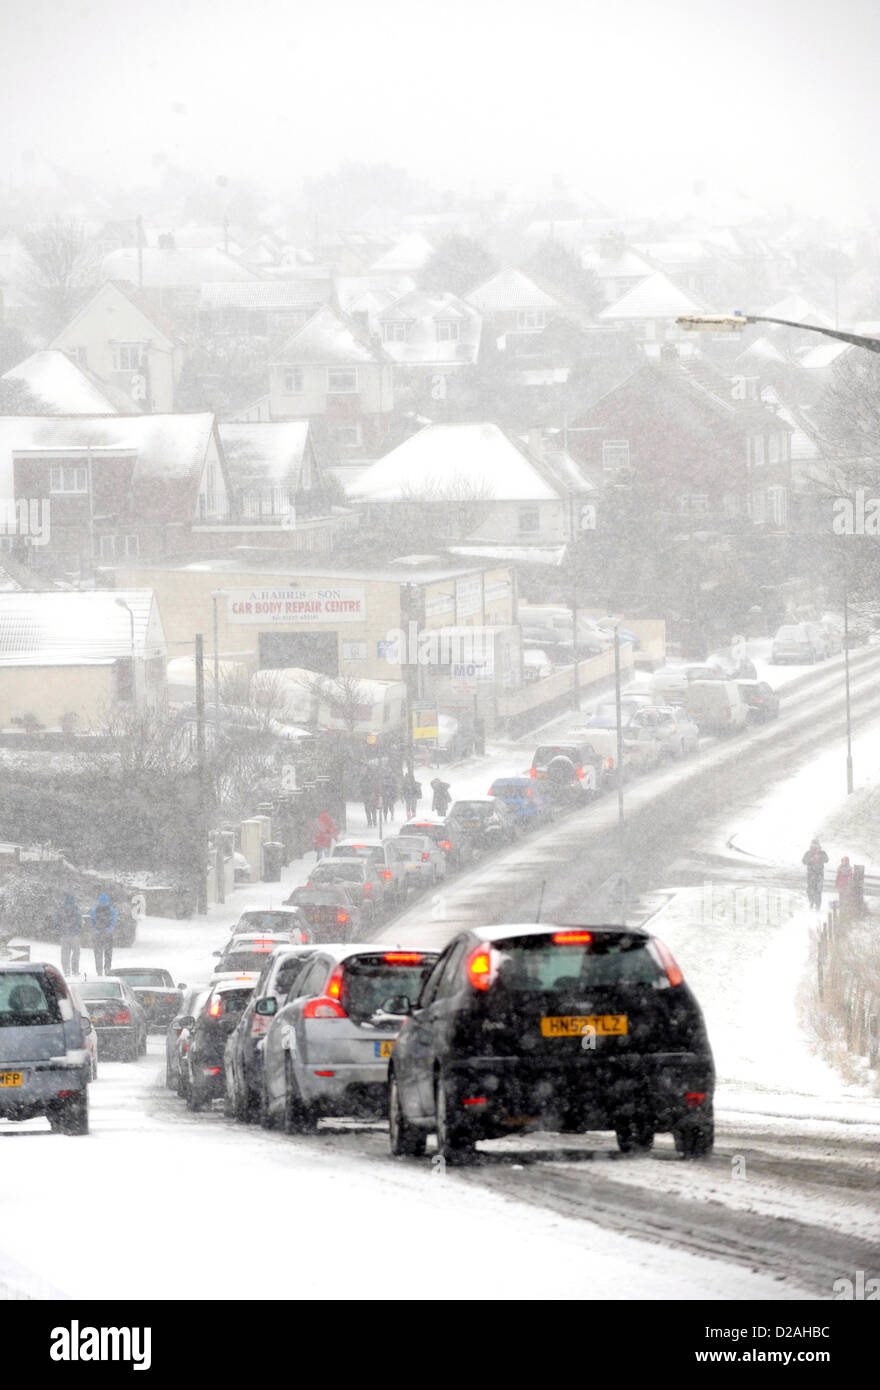 Brighton Sussex UK. 18 January 2013 - Gridlock on the roads at Woodingdean near Brighton this morning in the snow Stock Photo